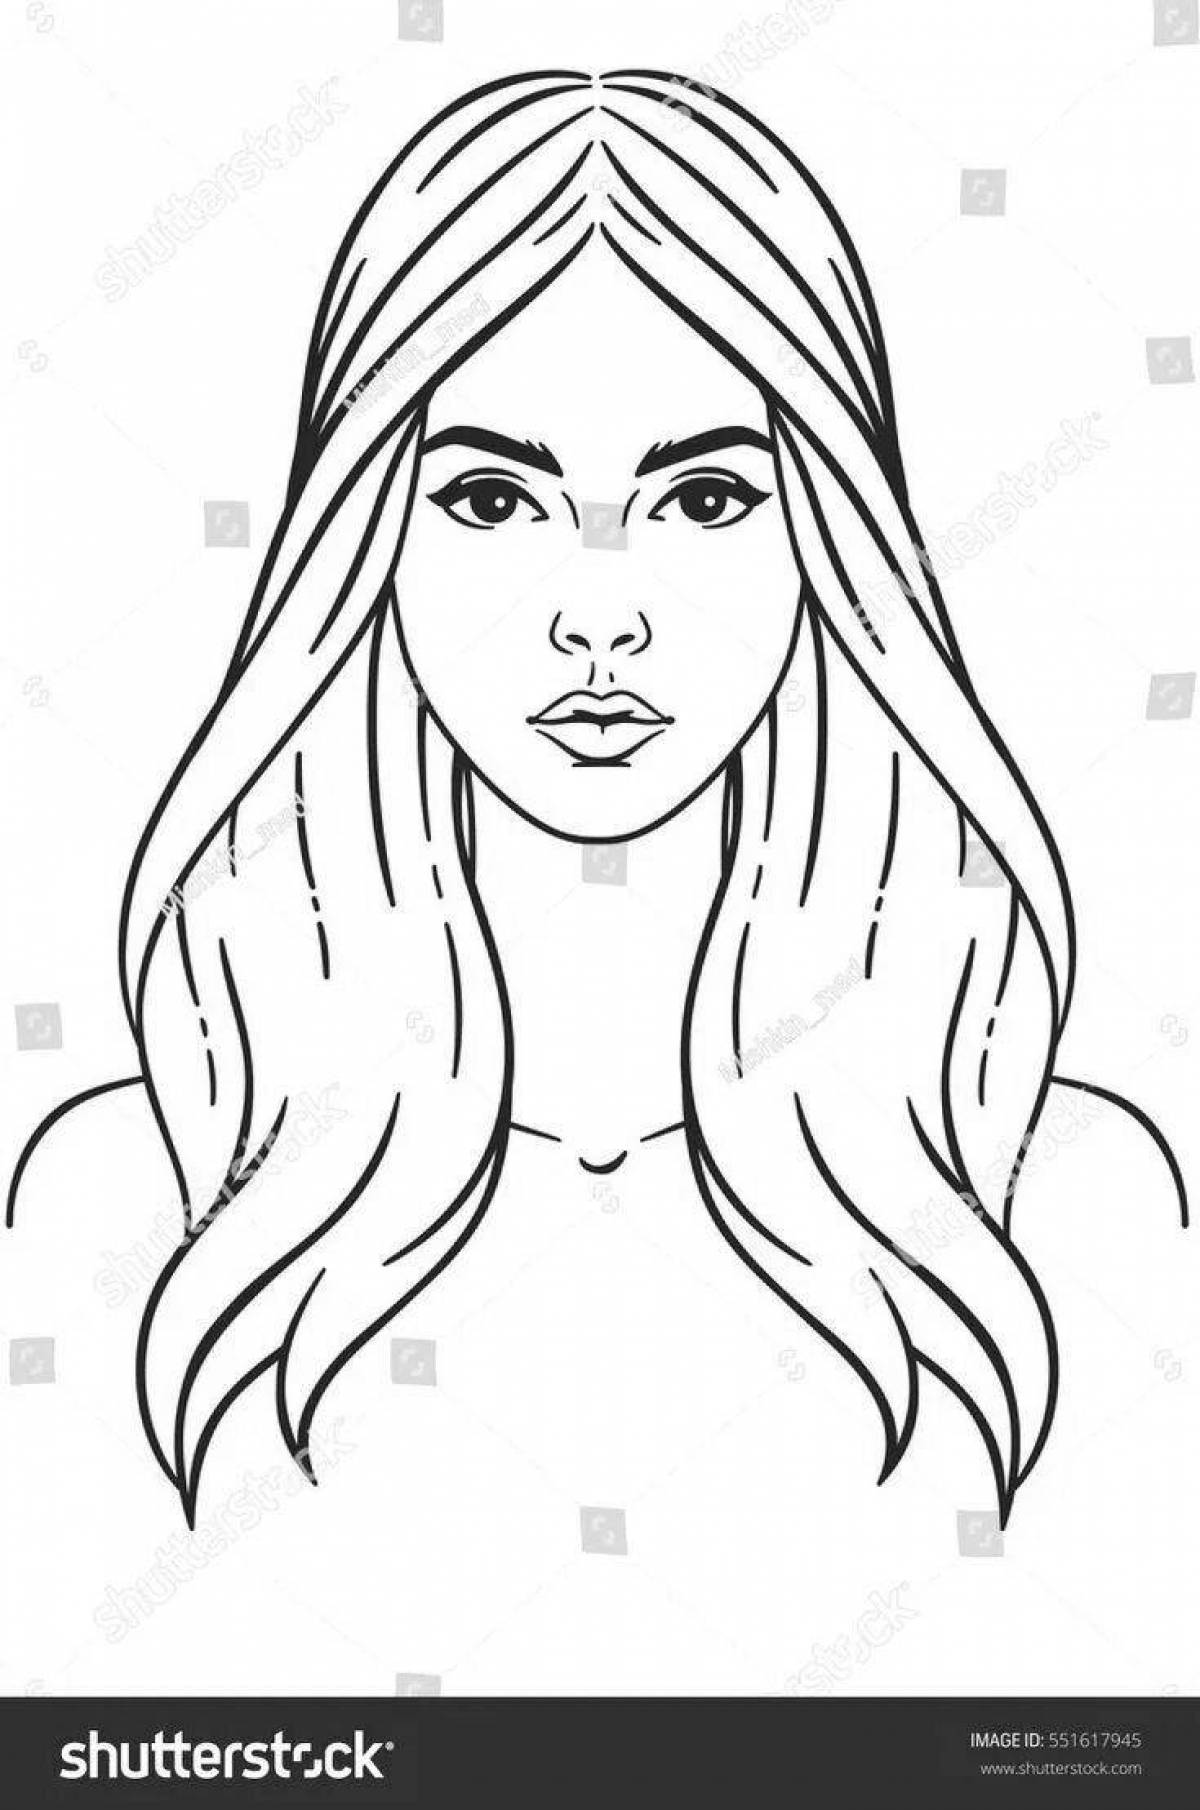 Coloring pages blushing human girl's face